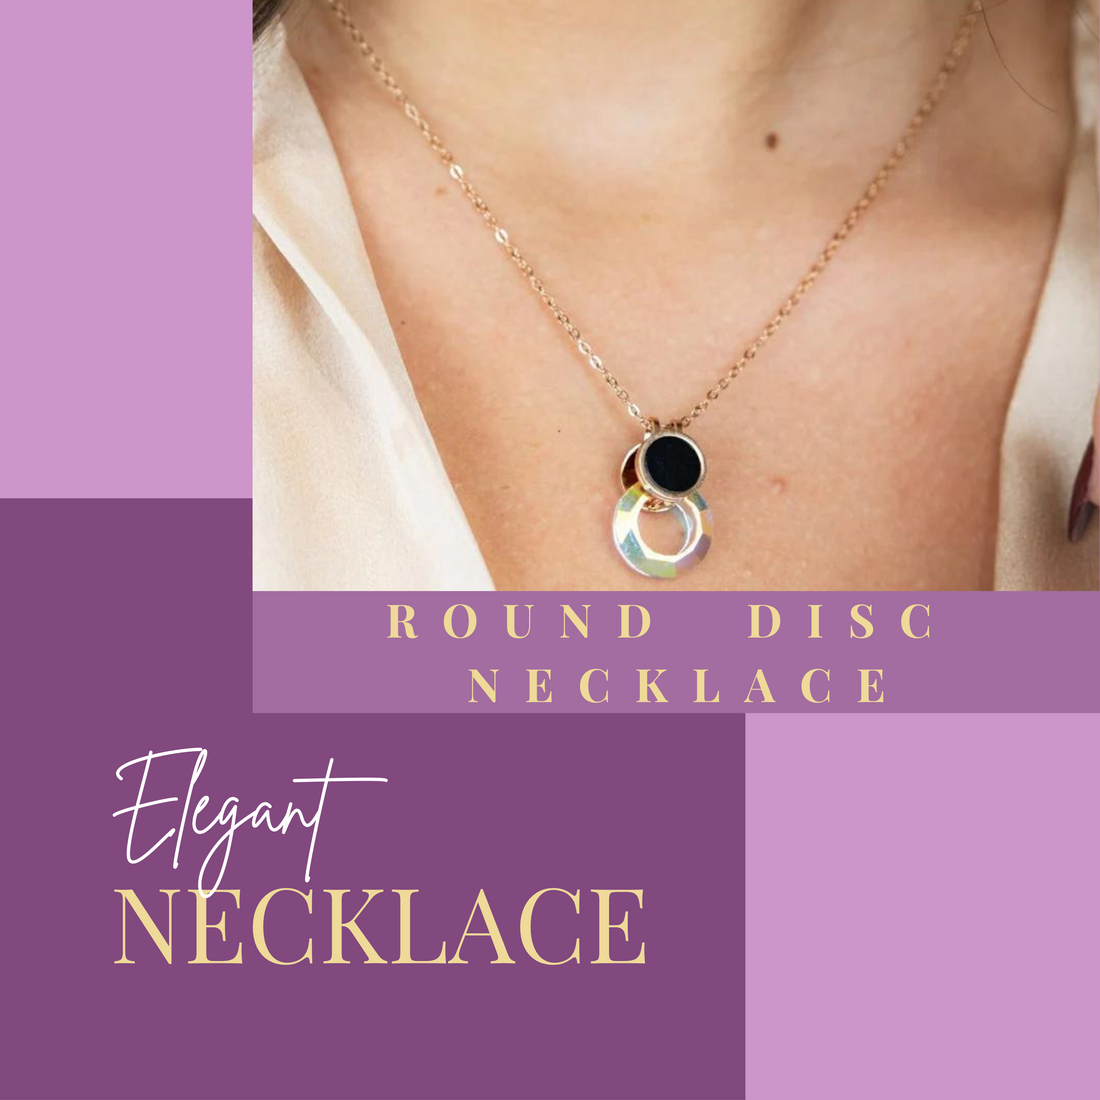 Round Disc Necklace - The Sleek Necklace That Goes with Everything (Seriously!)